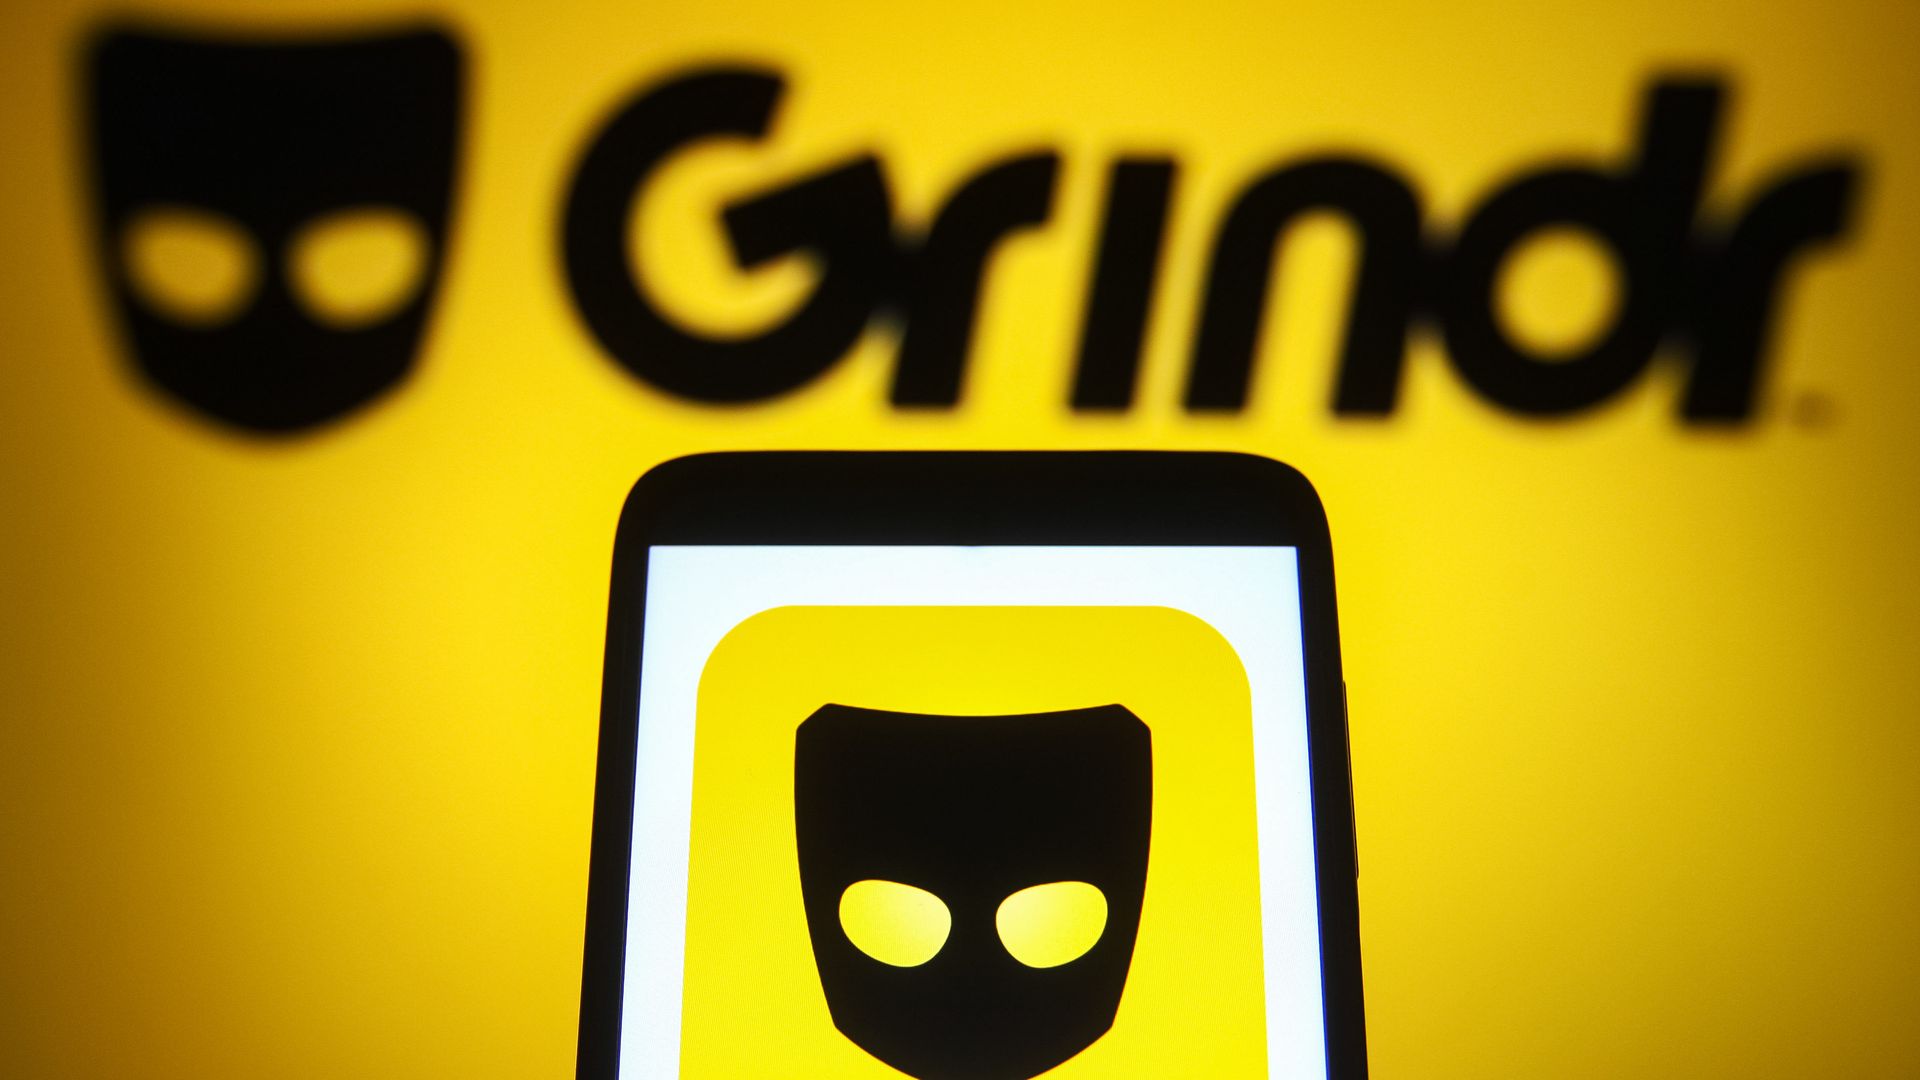 A photo illustration of the Grindr logo on a smartphone and a PC